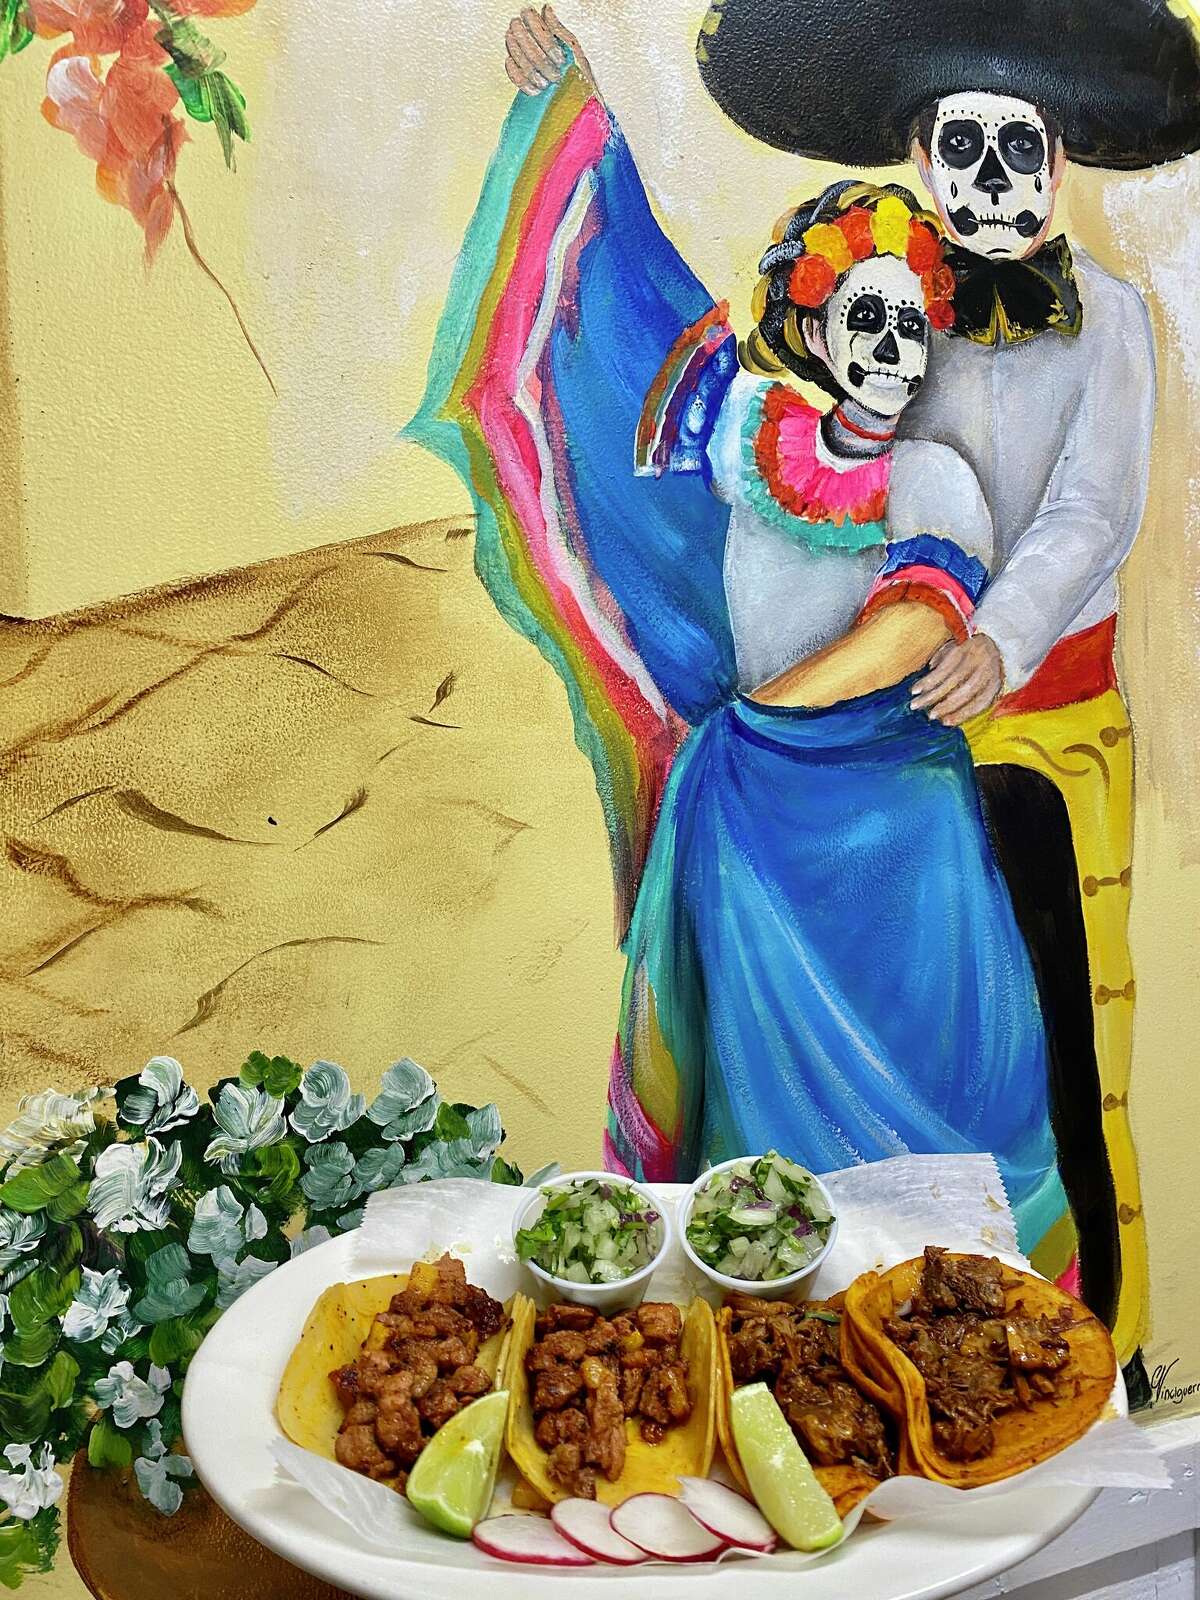 In the background, a mural of a man in a calavera/sugar skull mask in yellow pants with a red cumberbund, a white shirt and a black hat and a woman in a blue dress with white, pink and yellow trim, also in a calavera/sugar skull mask and flowers in her hair. They stand at a yellow wall in the painting. In the foreground, four meat filled tacos sit on a white plate with lime wedges and sliced radishes. There are two small cups of a green salad.